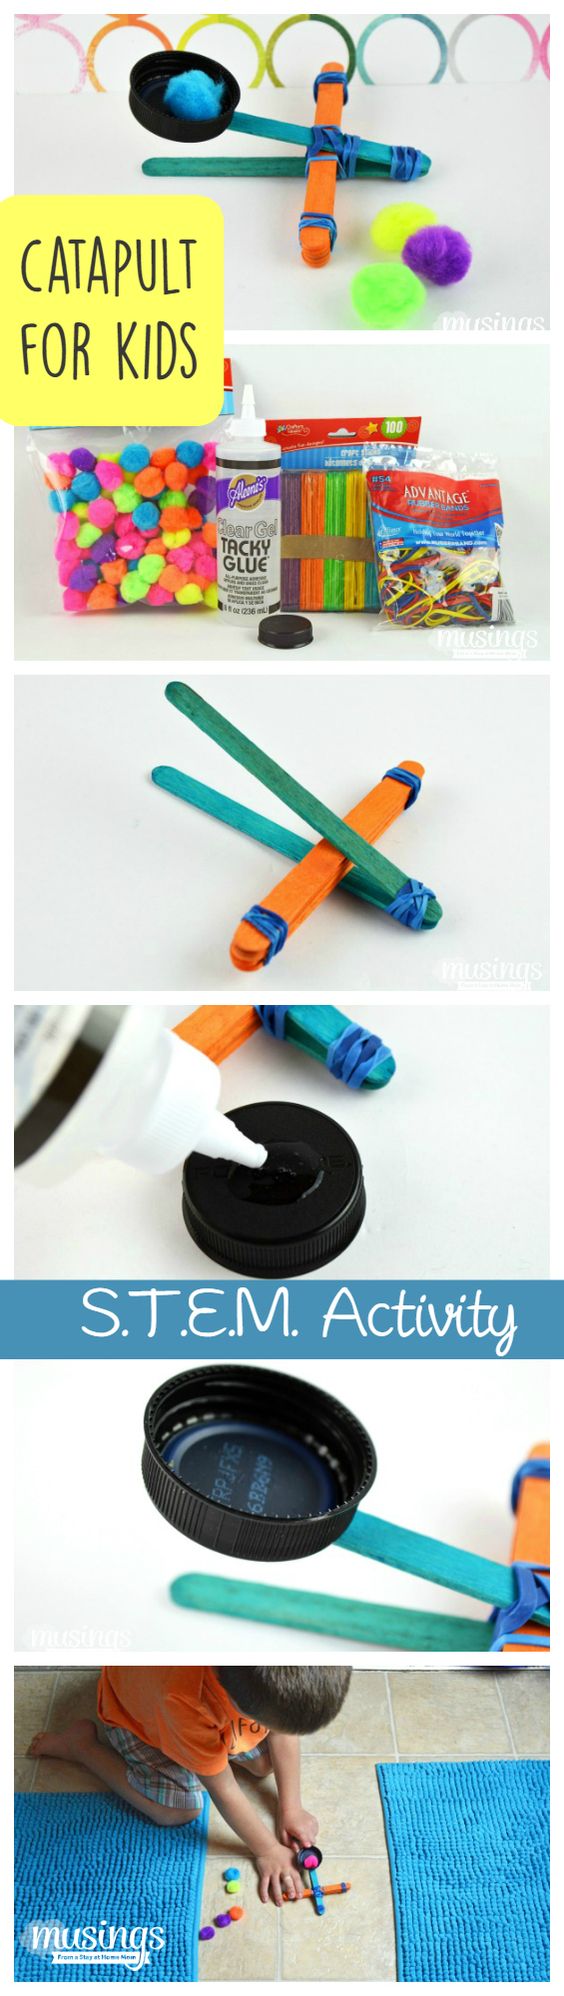 Easy & Inexpensive Catapult Craft Activity With Popsicle Sticks, Pom Pom, Bottle Cap & Rubber Band - Recycled Art & Games for Toddlers 